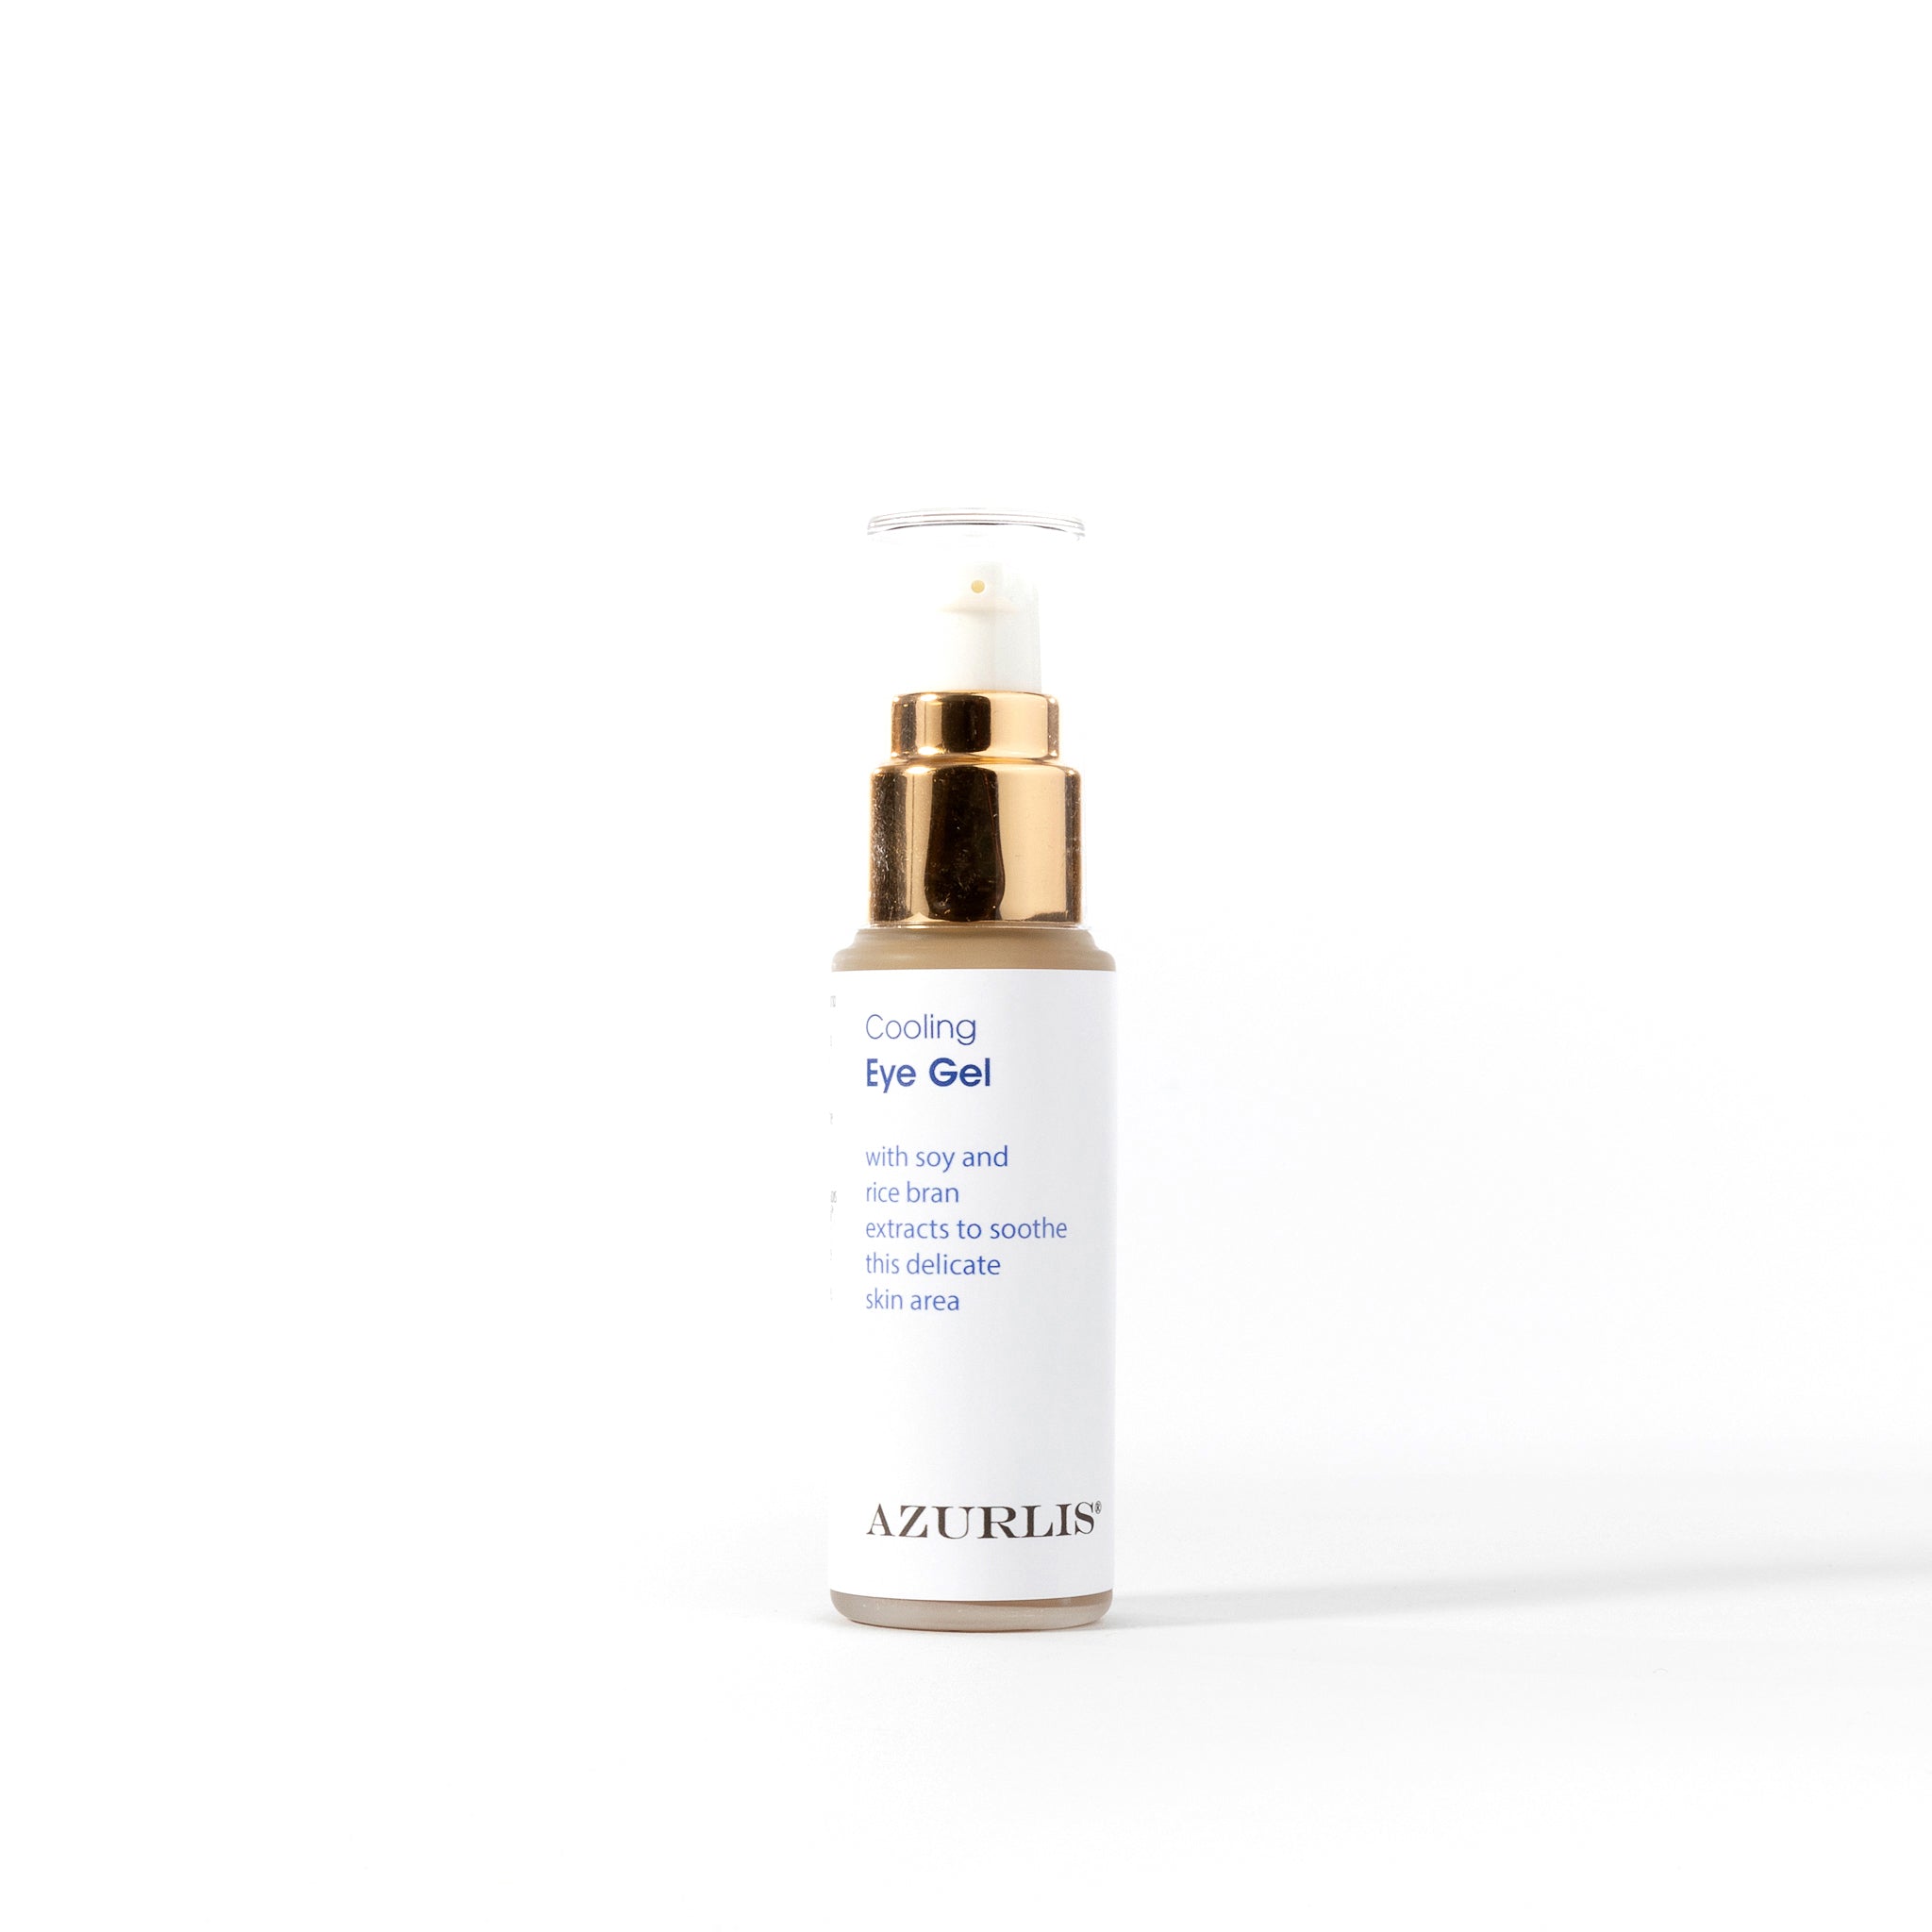 Azurlis™ Cooling Eye Gel 30ml is calming and soothing.  With rice peptides to reduce eye puffiness or relieve tired eyes, as well as extracts of aloe vera, cucumber and bilberry to sooth the delicate skin around the eyes.